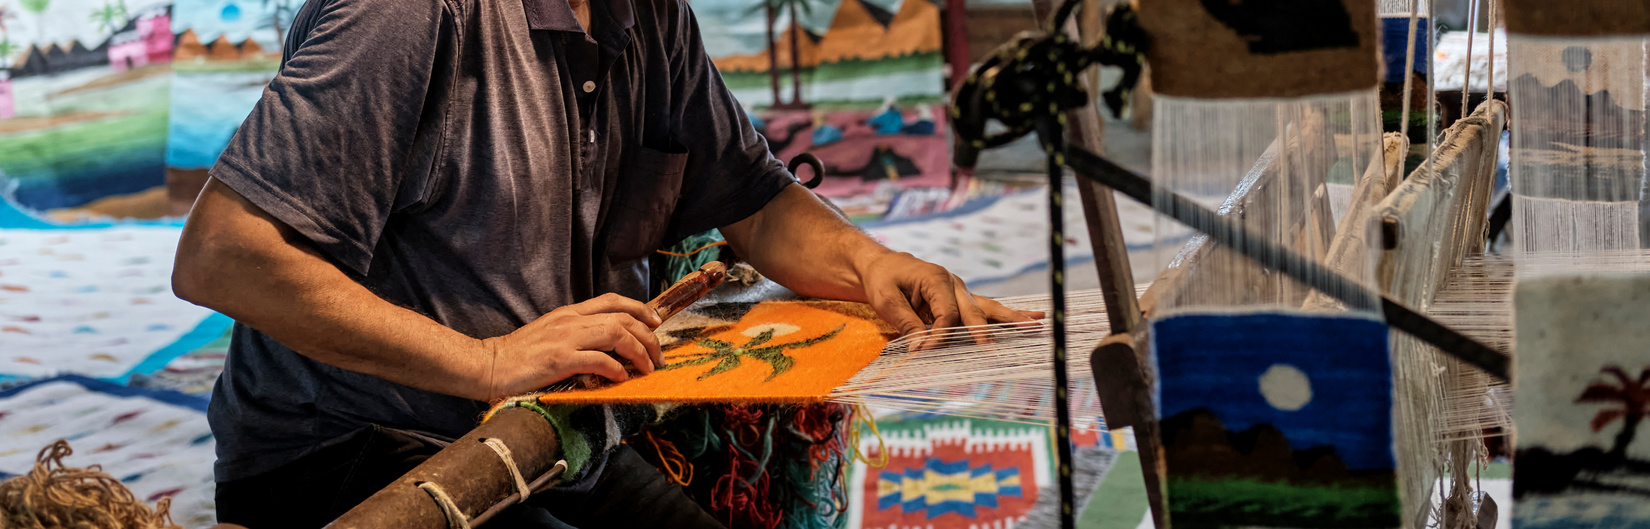 Hands of middle aged man spinning colorful small rug with image of palm tree on handloom.